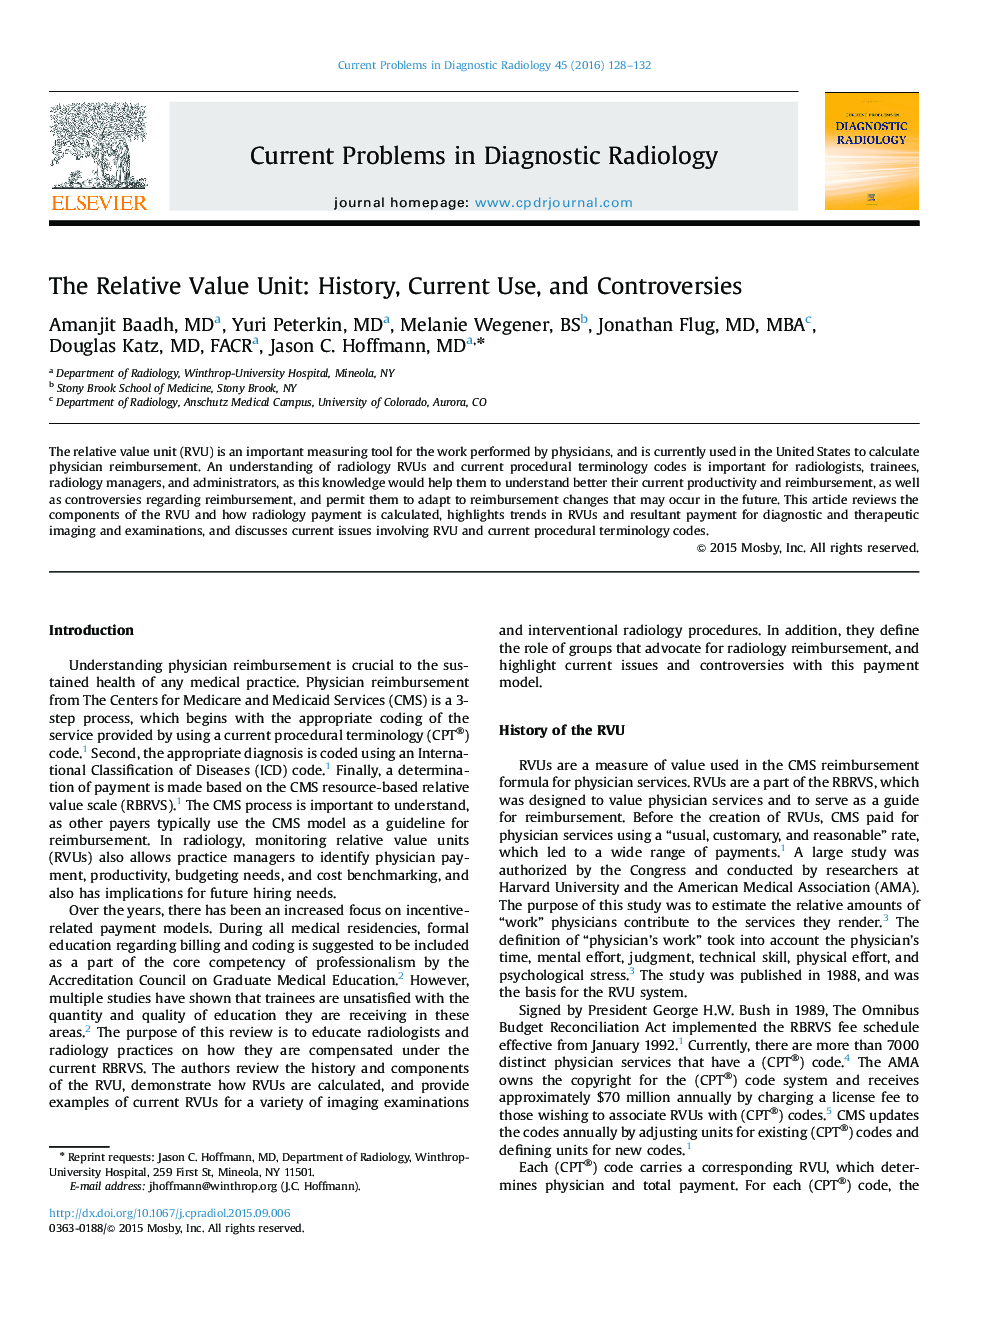 The Relative Value Unit: History, Current Use, and Controversies